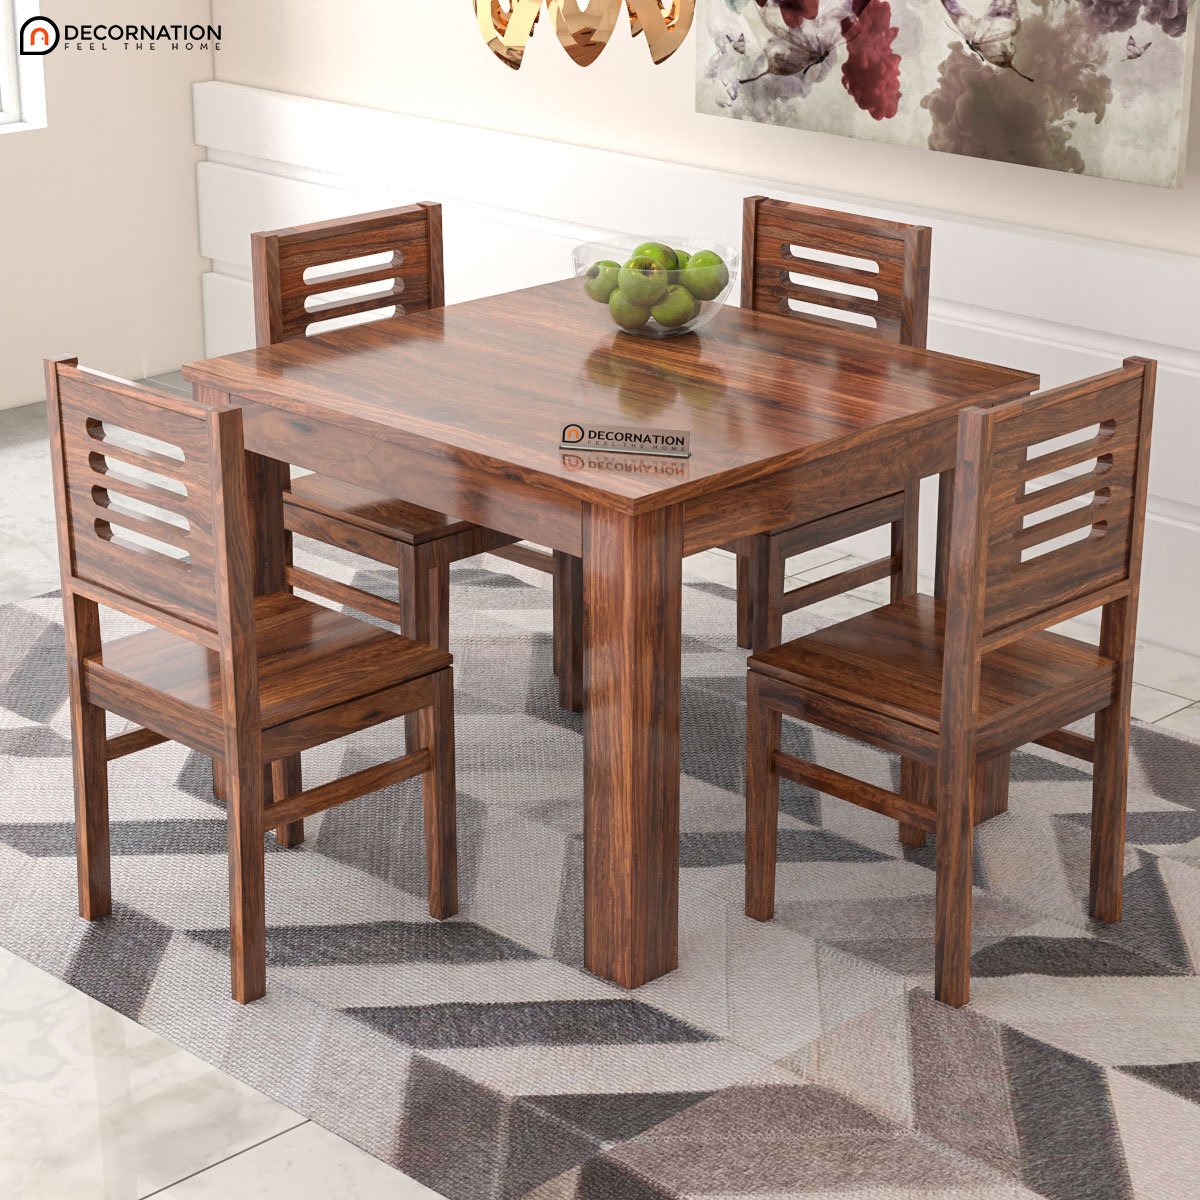 Diest Wooden 4 seater Dining Table Set